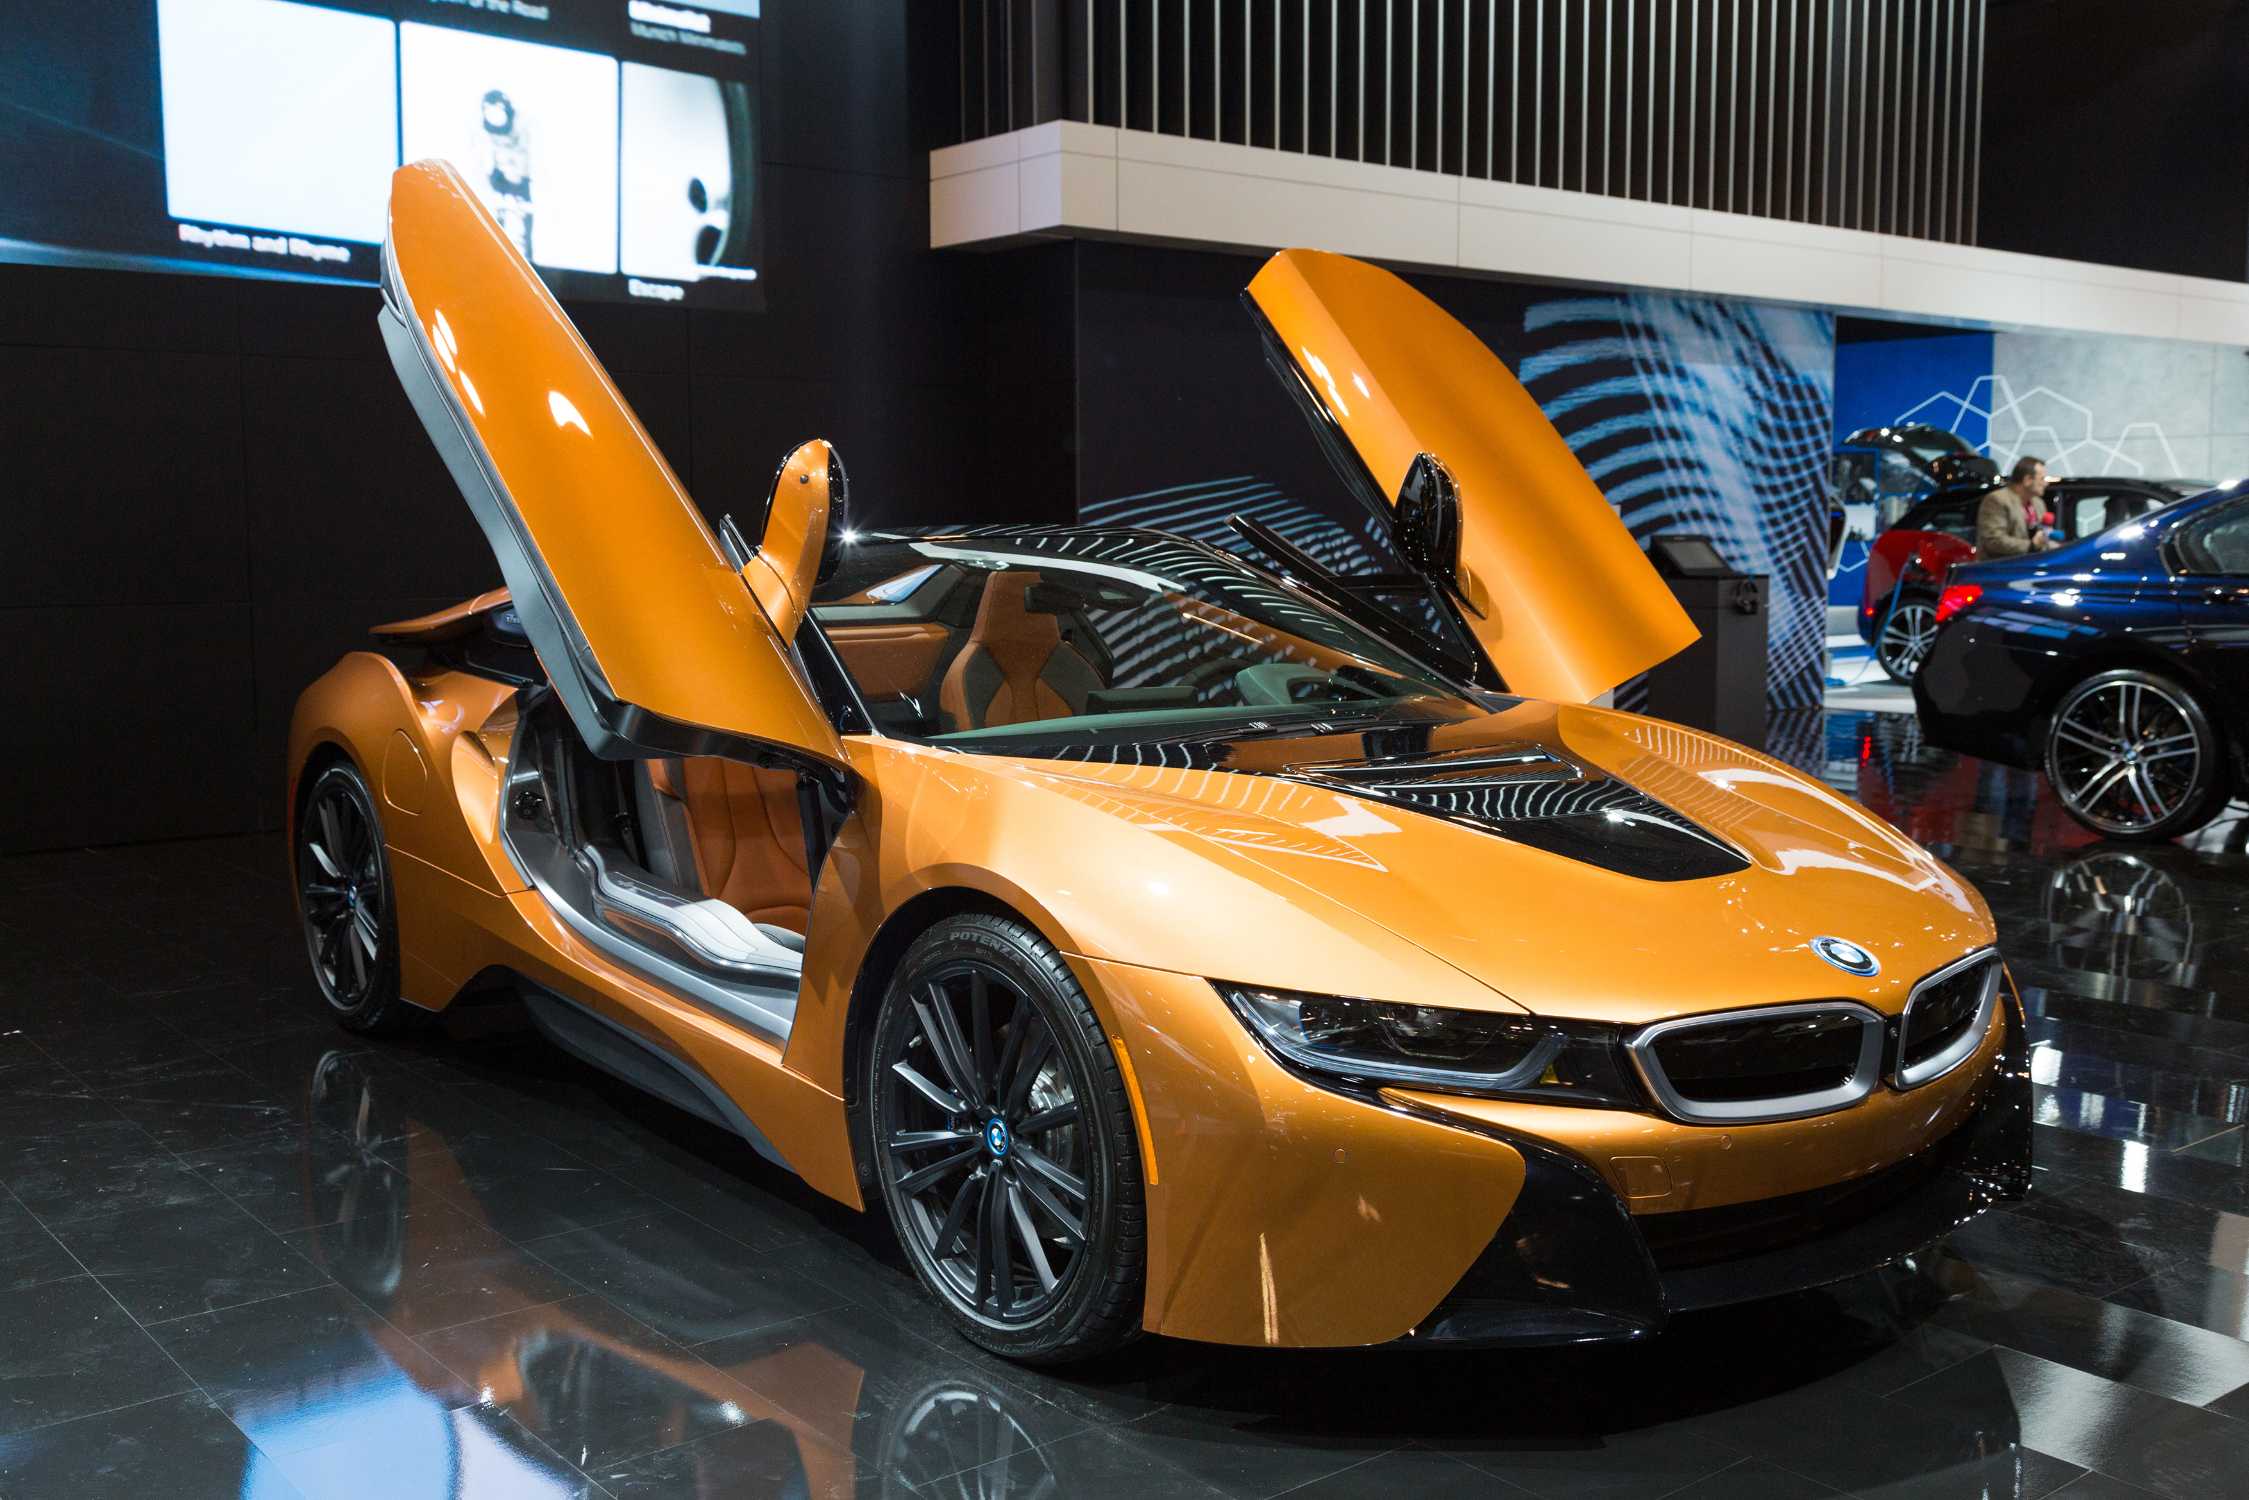 BMW presents the Canadian premiere of the all-new BMW i8 Roadster (03/2018)